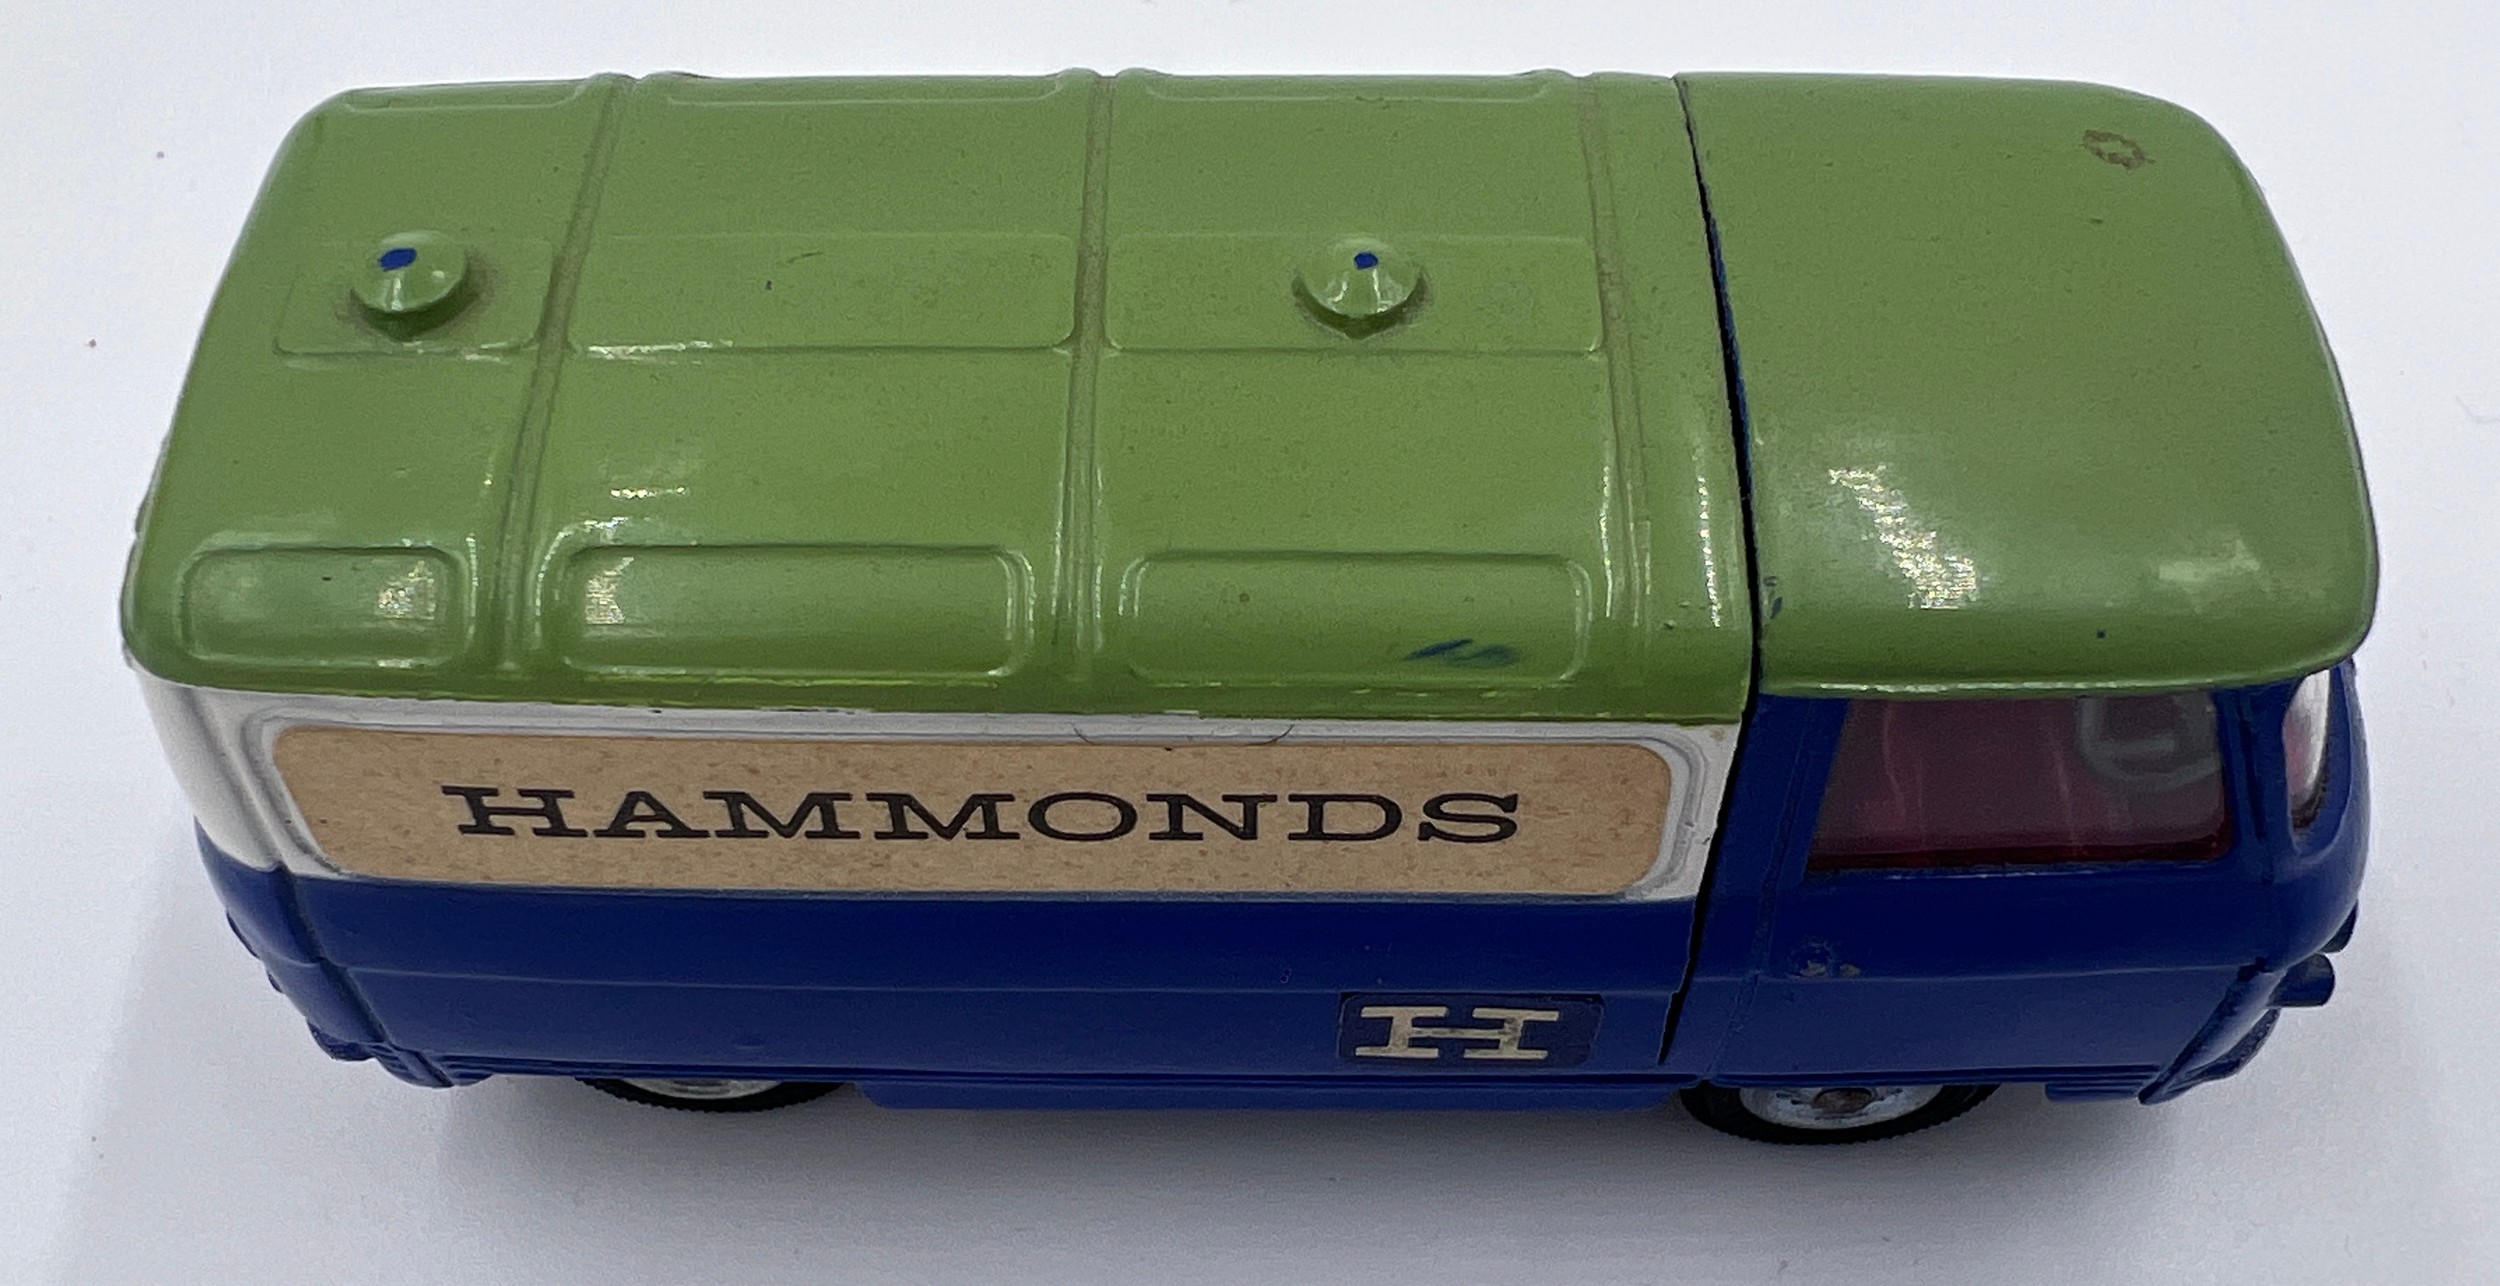 Corgi 462 Commer "Hammonds" Promotional Van in original box - finished in blue with a green roof, - Image 6 of 10